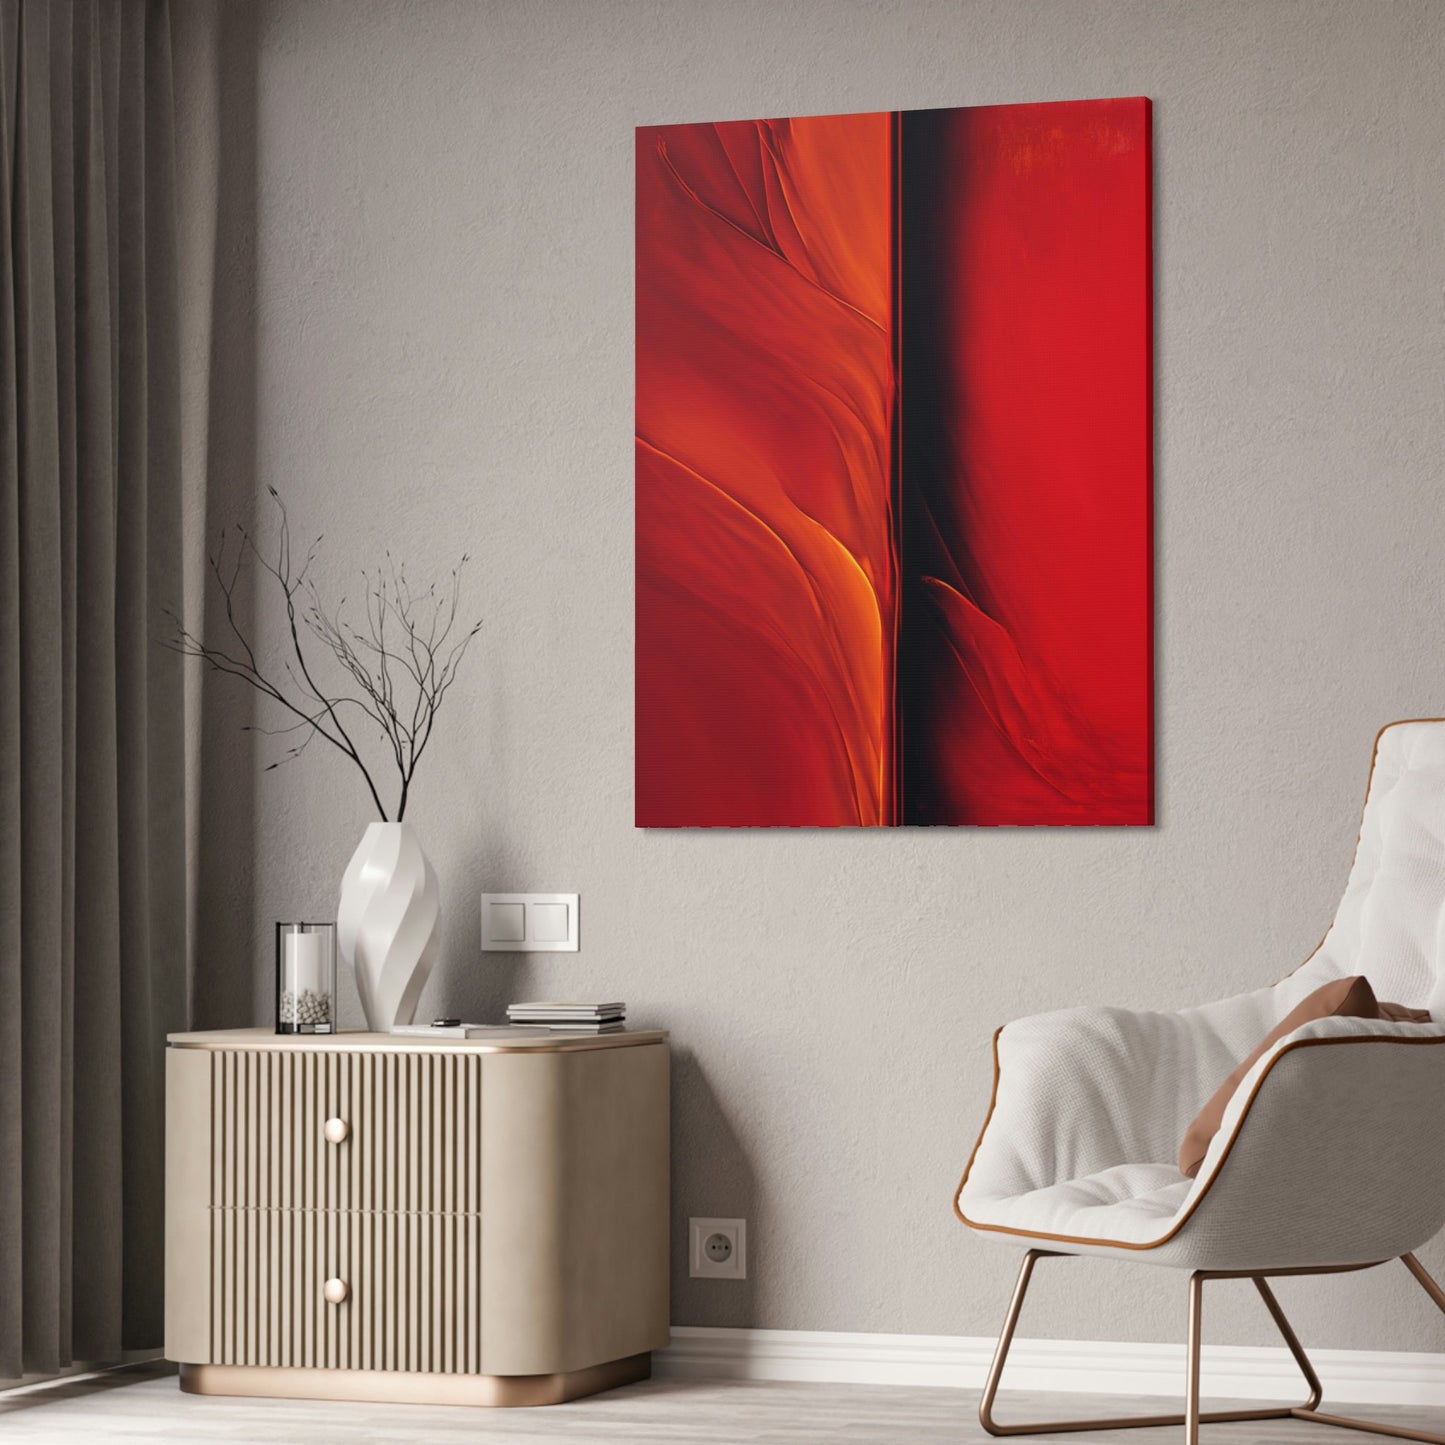 The Power of Red: An Abstract Masterpiece